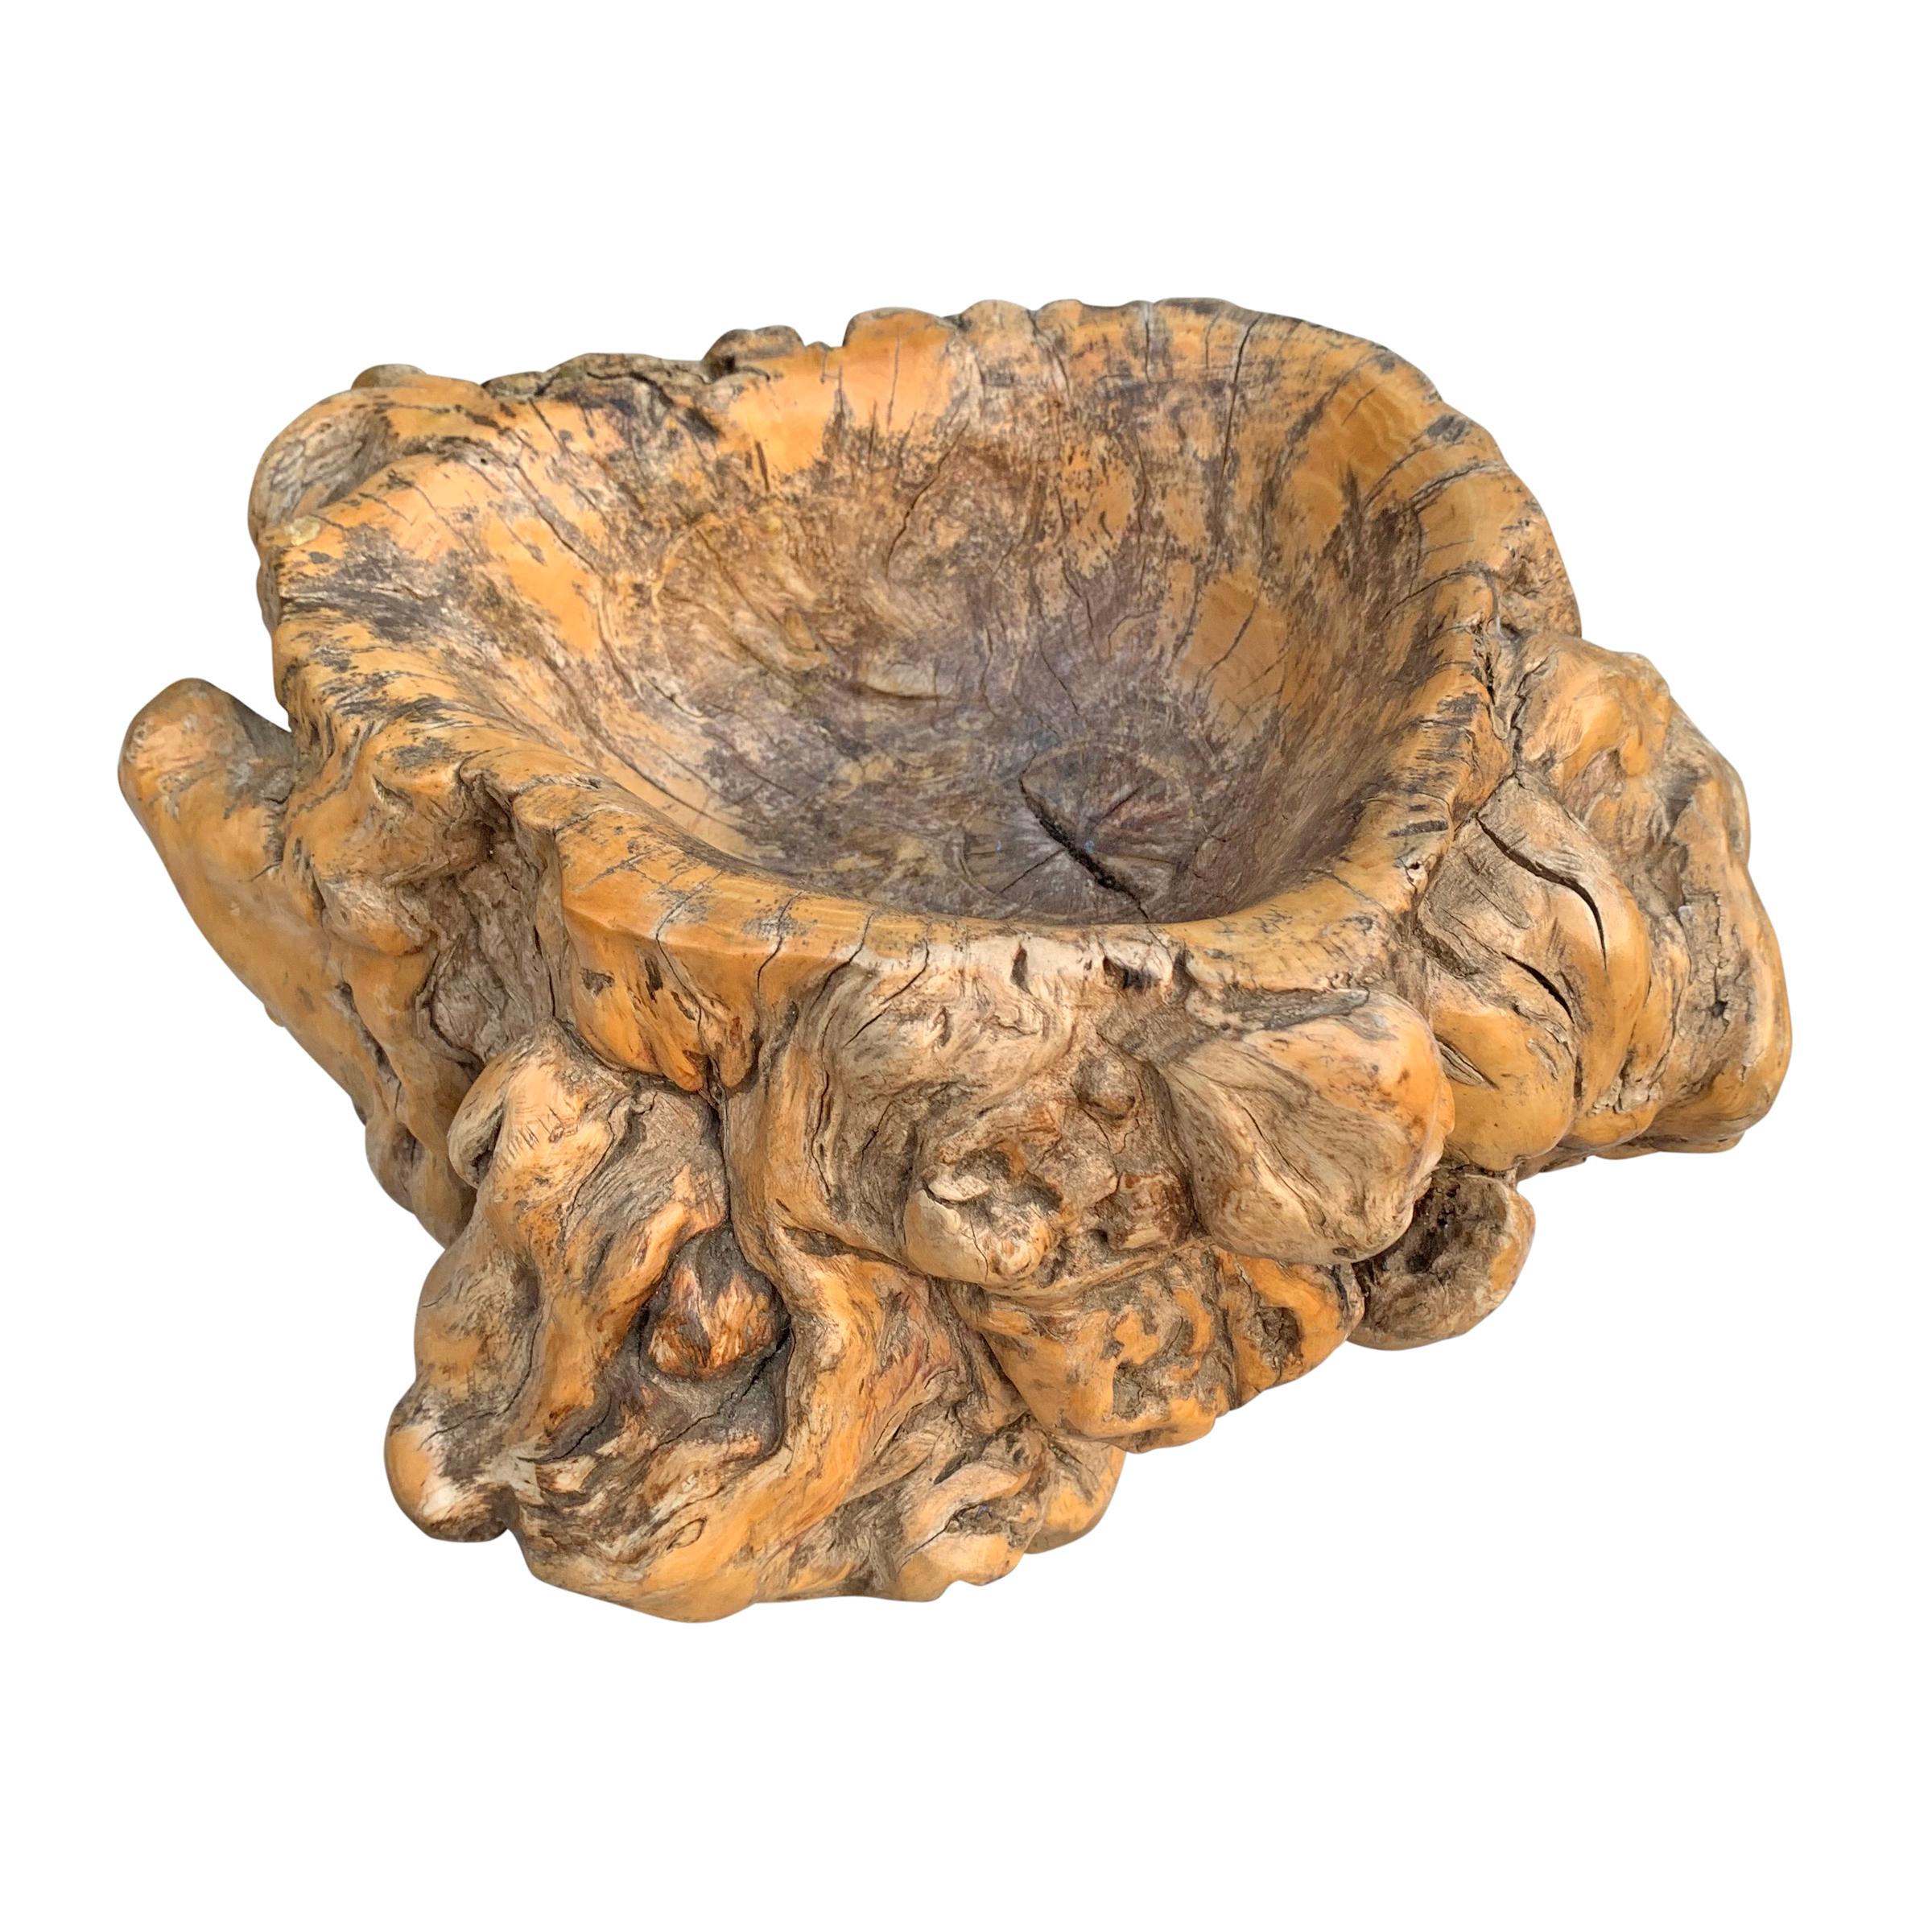 An incredible 19th century rootwood bowl carved from a single piece of knarled rootwood standing on three legs, and with natural undulating surface and a well worn patina. Perfect on its own in a modern interior, or filled with snacks at your next